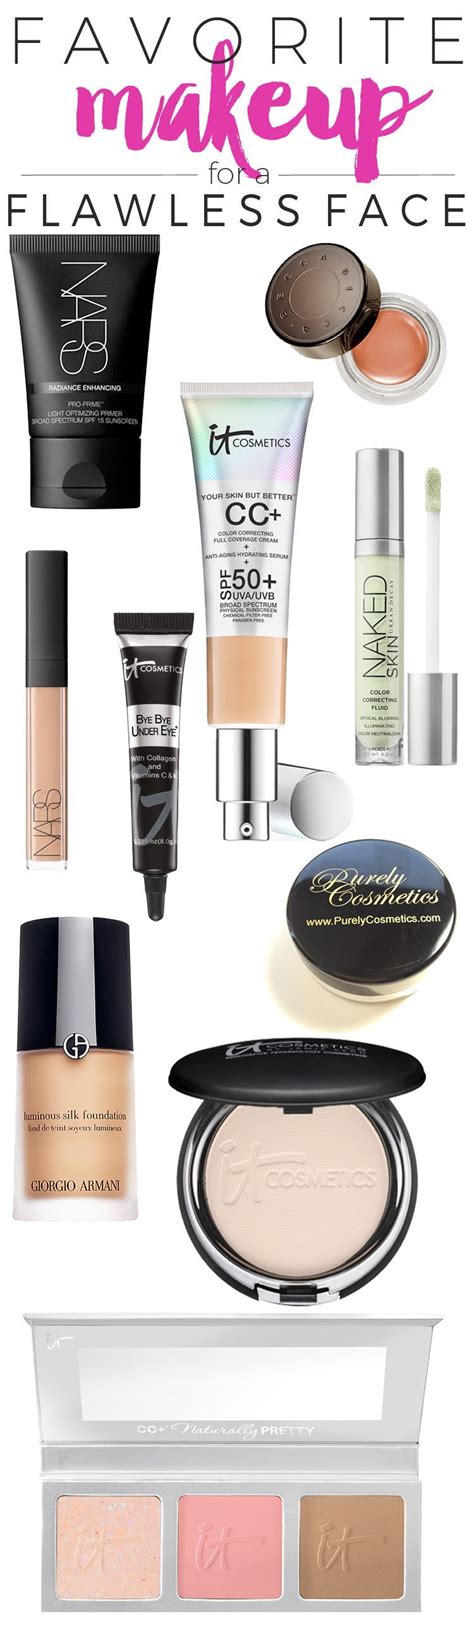 My 10 Favorite Makeup Products For A Flawless Face Flawless Face